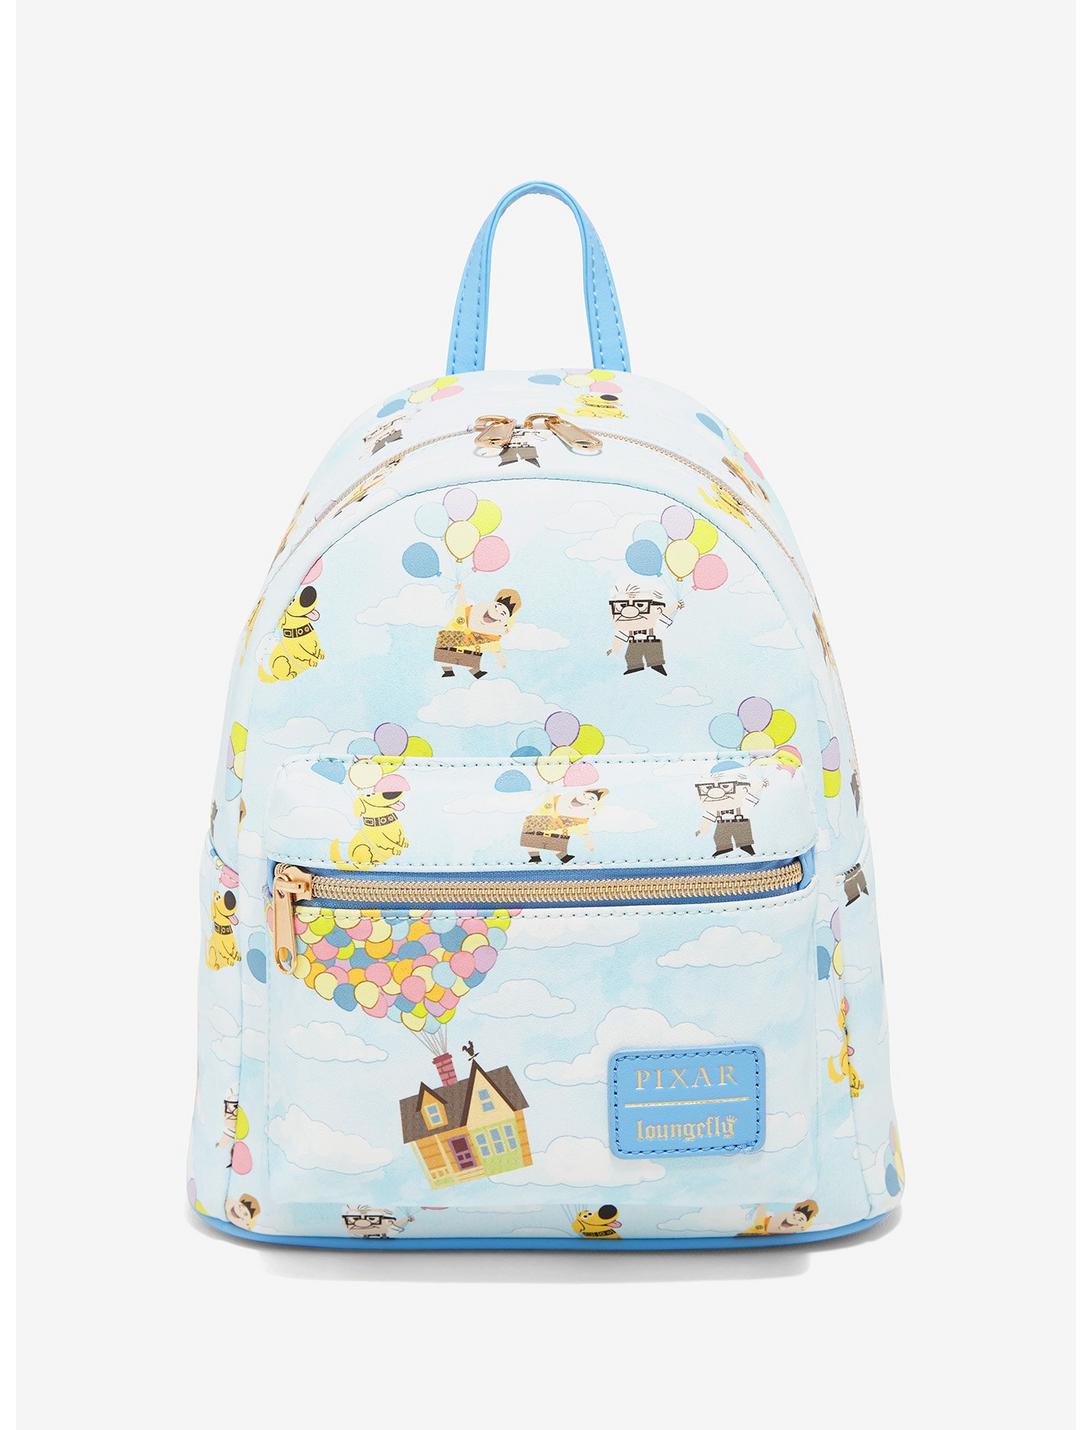 Pin on Unique Bags from Disney, Loungefly & More